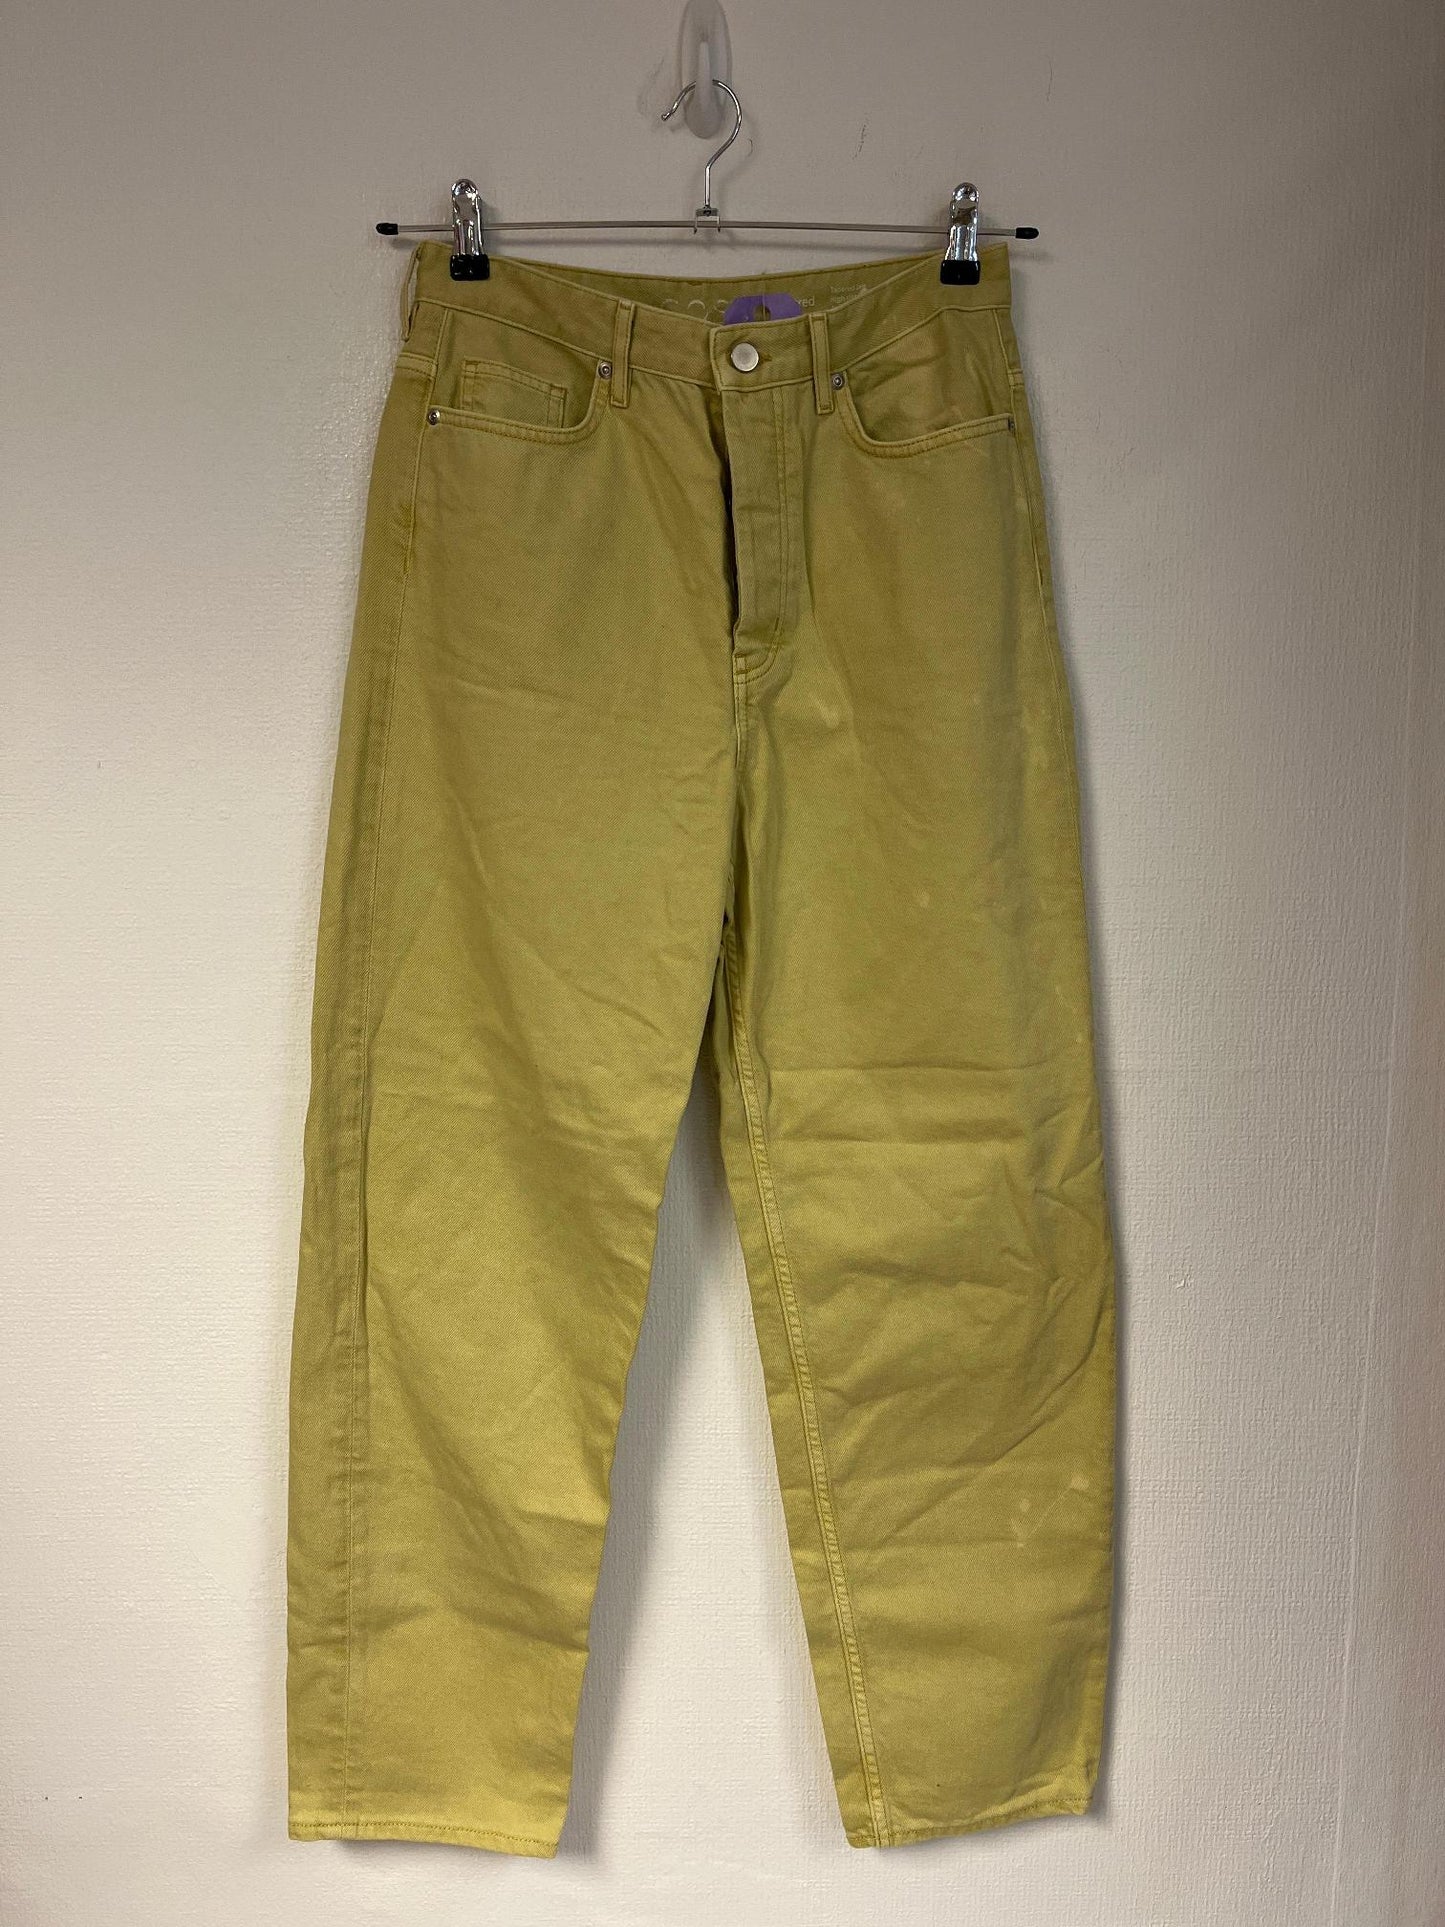 Yellow high rise jeans, size 8/10 - Damaged Item Sale